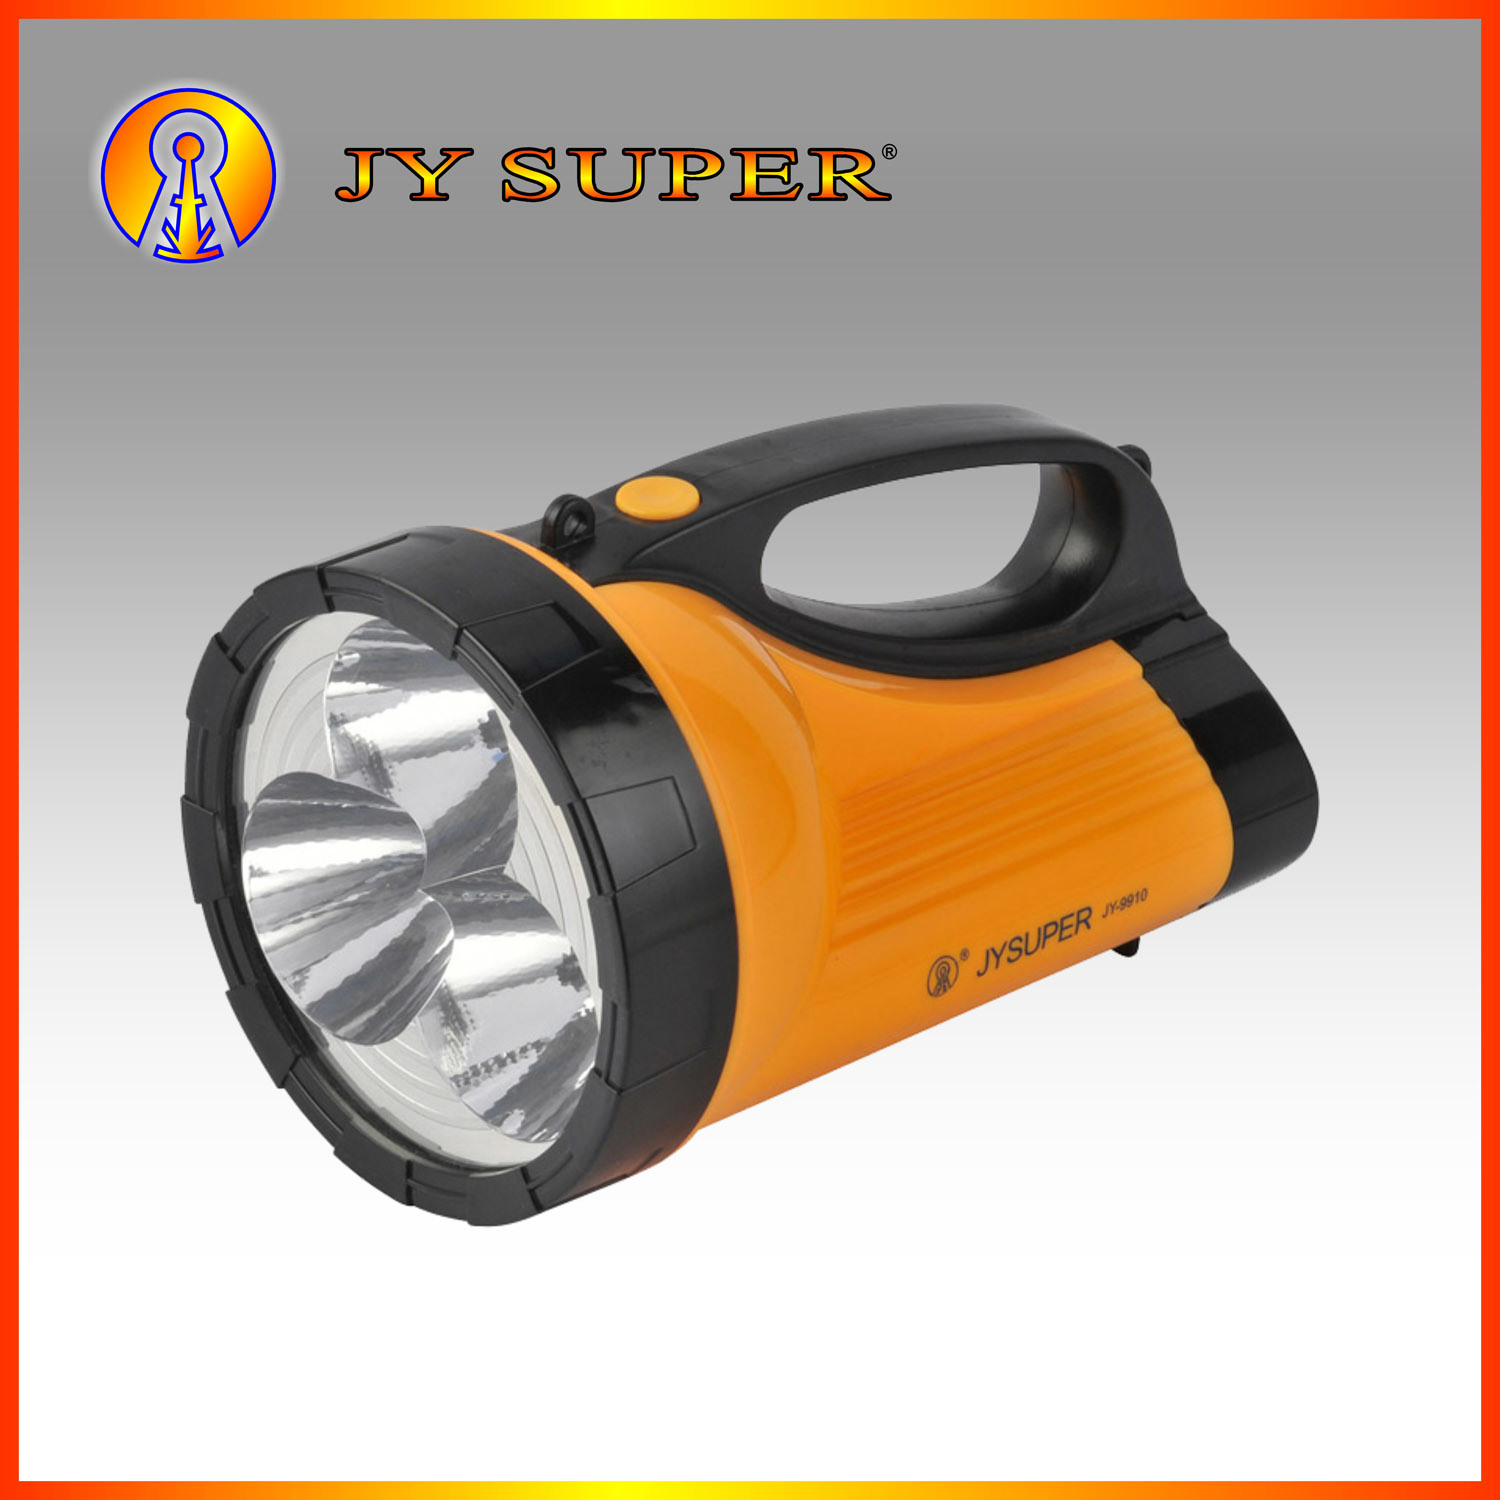 Jy Super 1.5W Rechargeable Portable Torch with Handle (JY-9910)